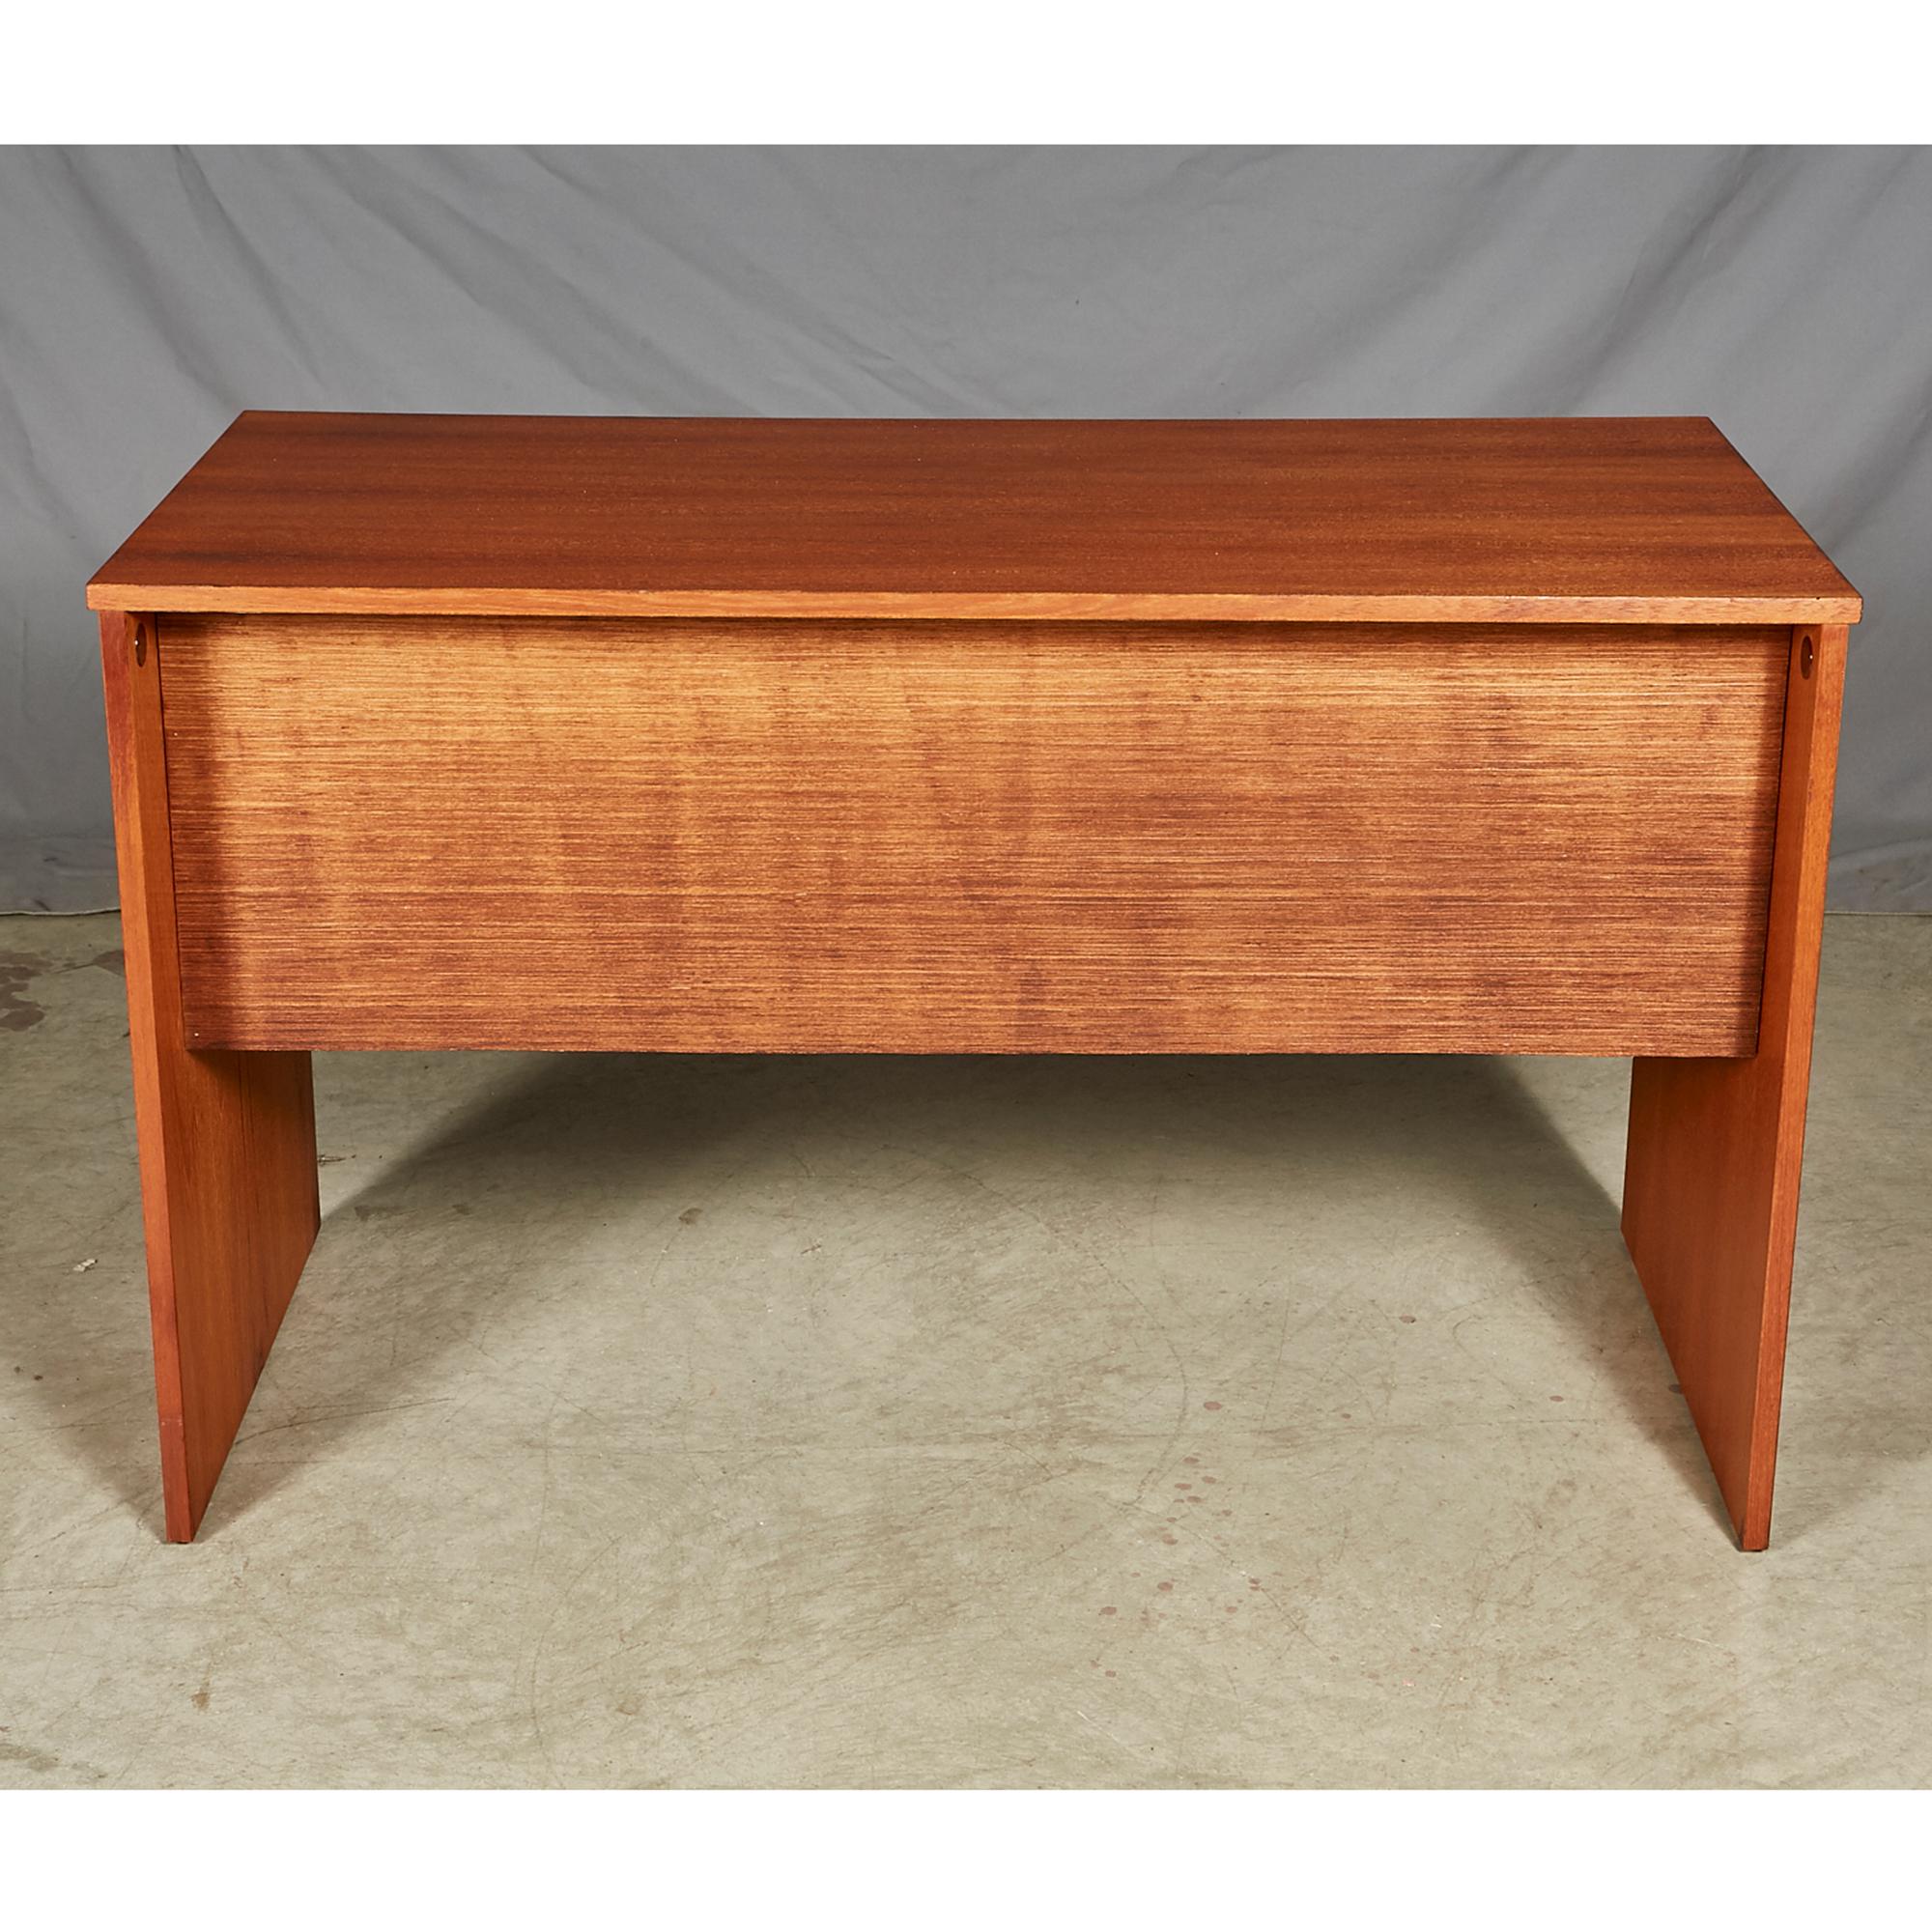 1970s Danish Teak Desk In Excellent Condition For Sale In Amherst, NH